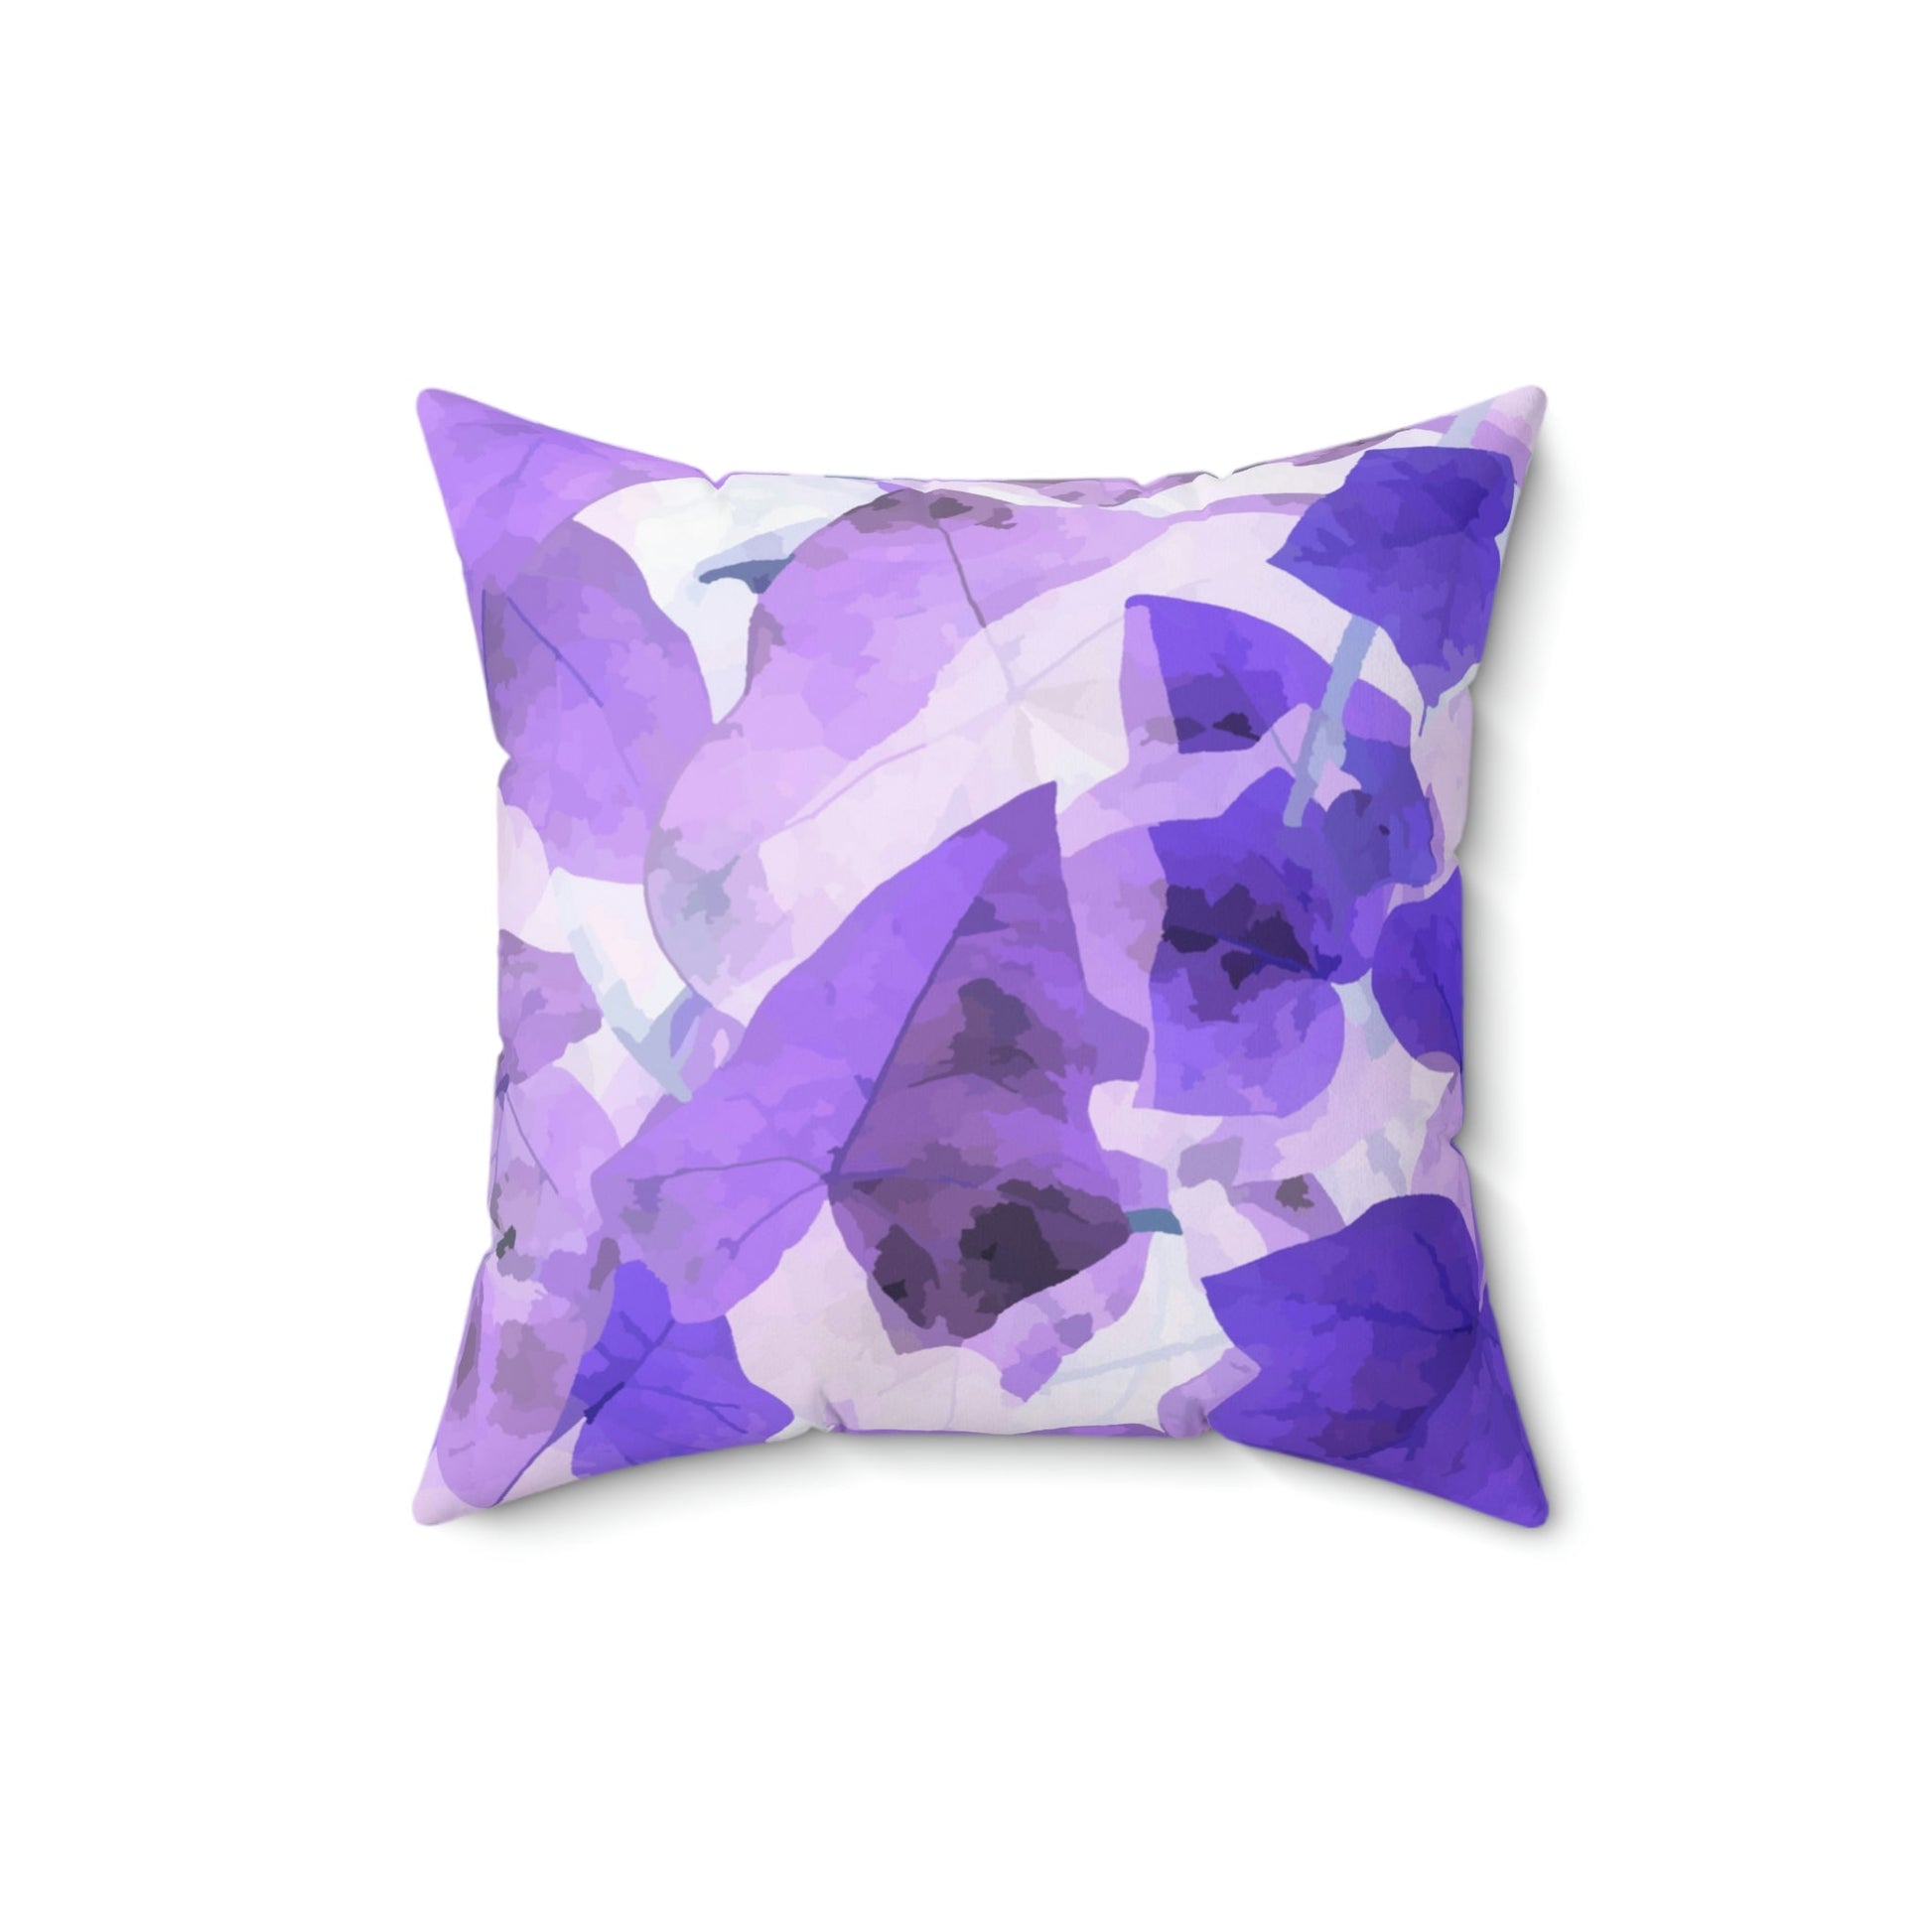 Lavender Leaf Square Pillow Home Decor Pink Sweetheart